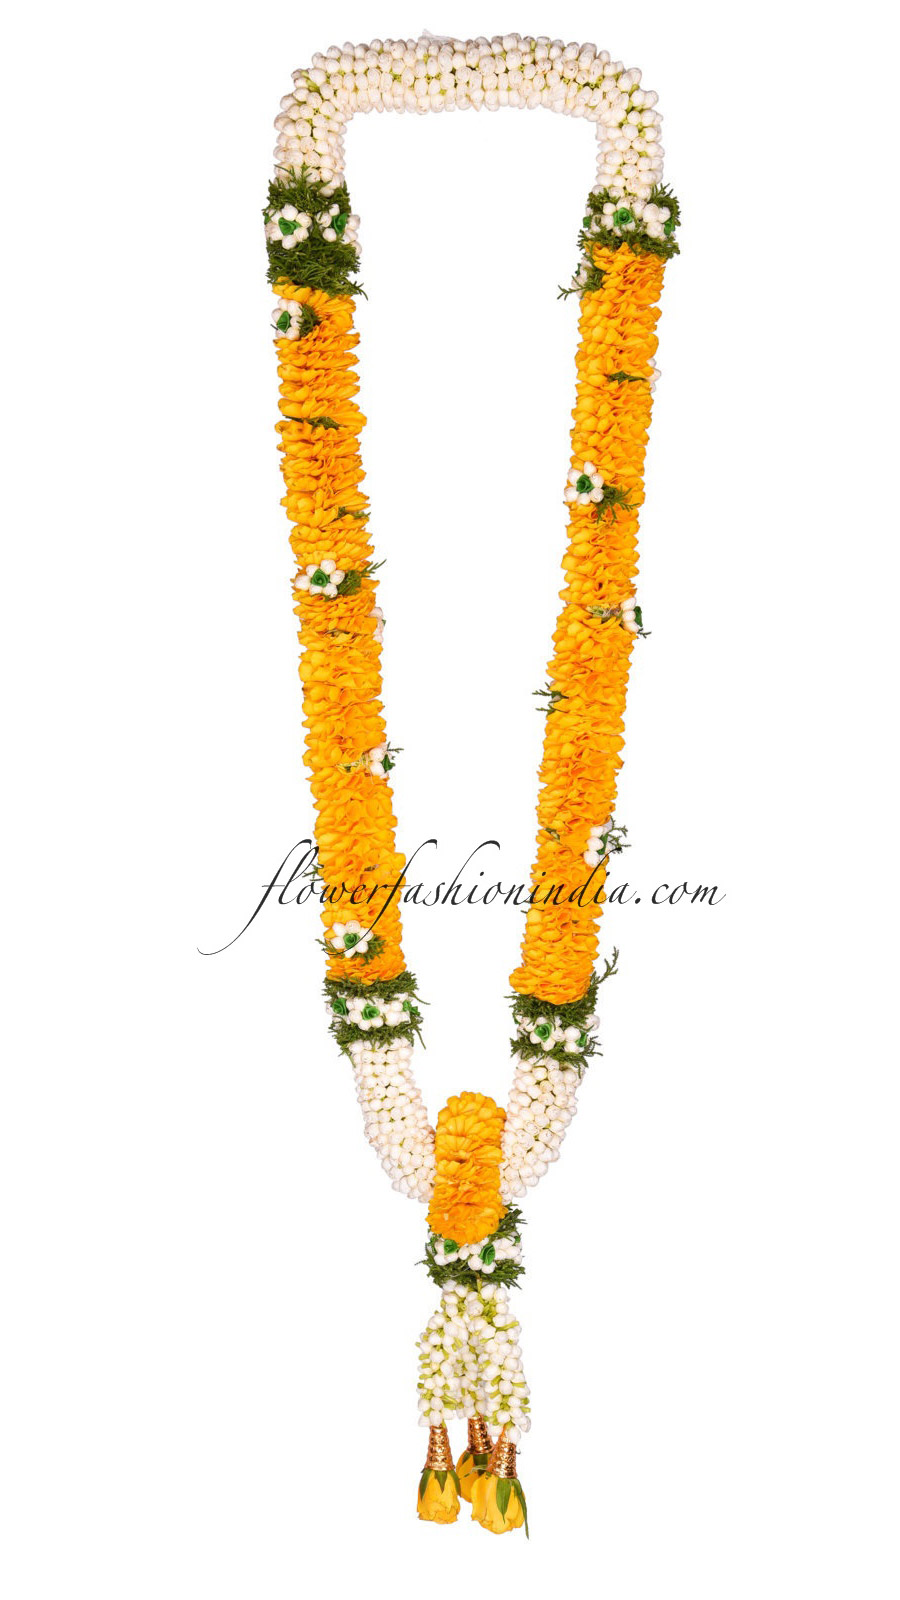 Jasmine Non Fragrance  Yellow Rose Garland With Greens  Green Satin  Flowers (1 PAIR) Flower Fashion India